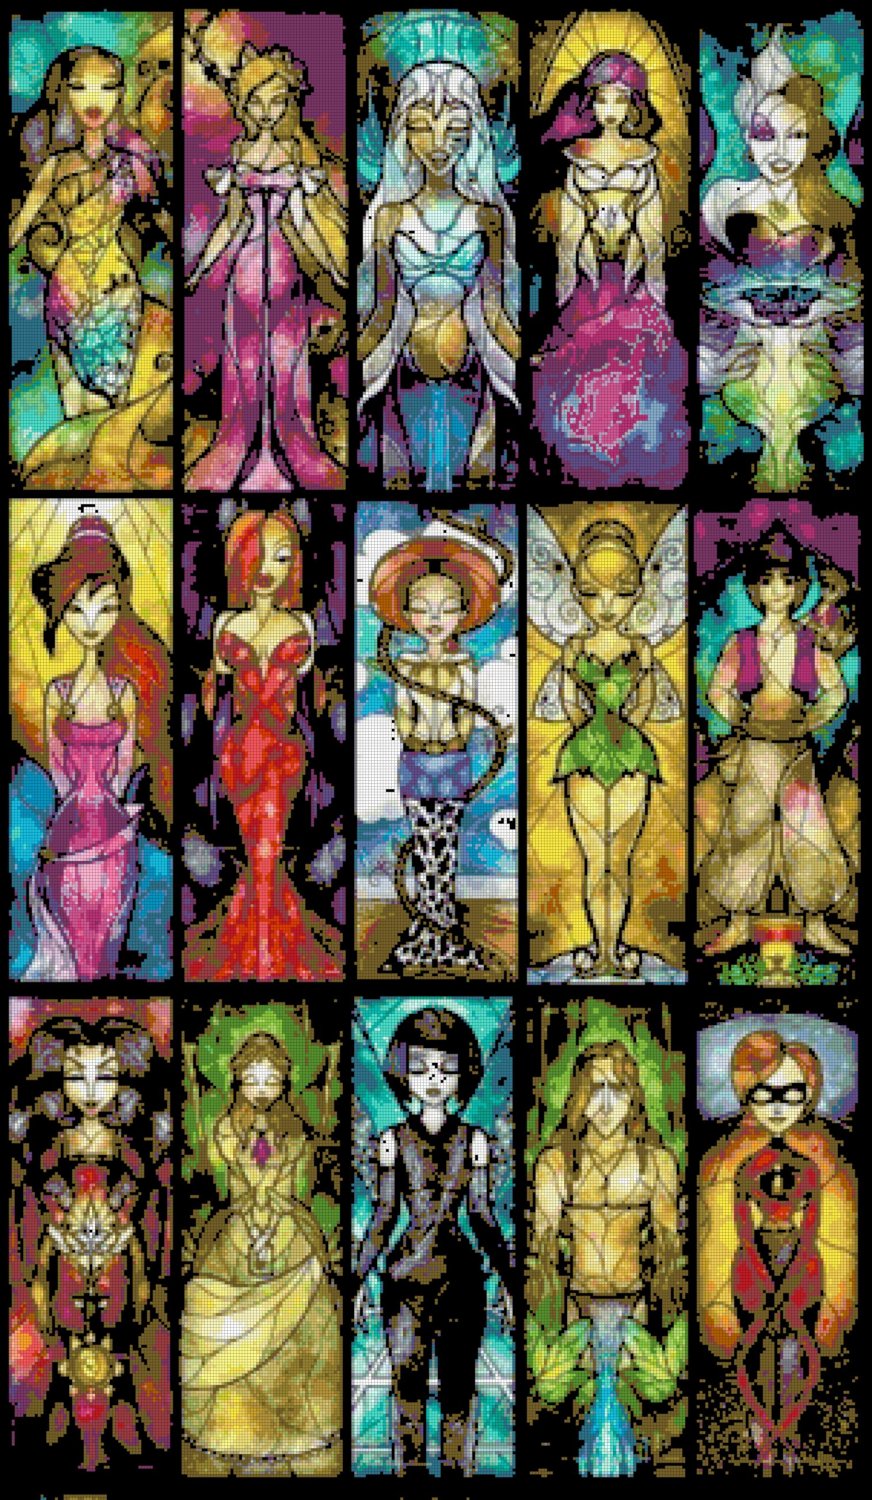 counted cross stitch pattern 15 princesses stained glass 297x518 stitches E1481